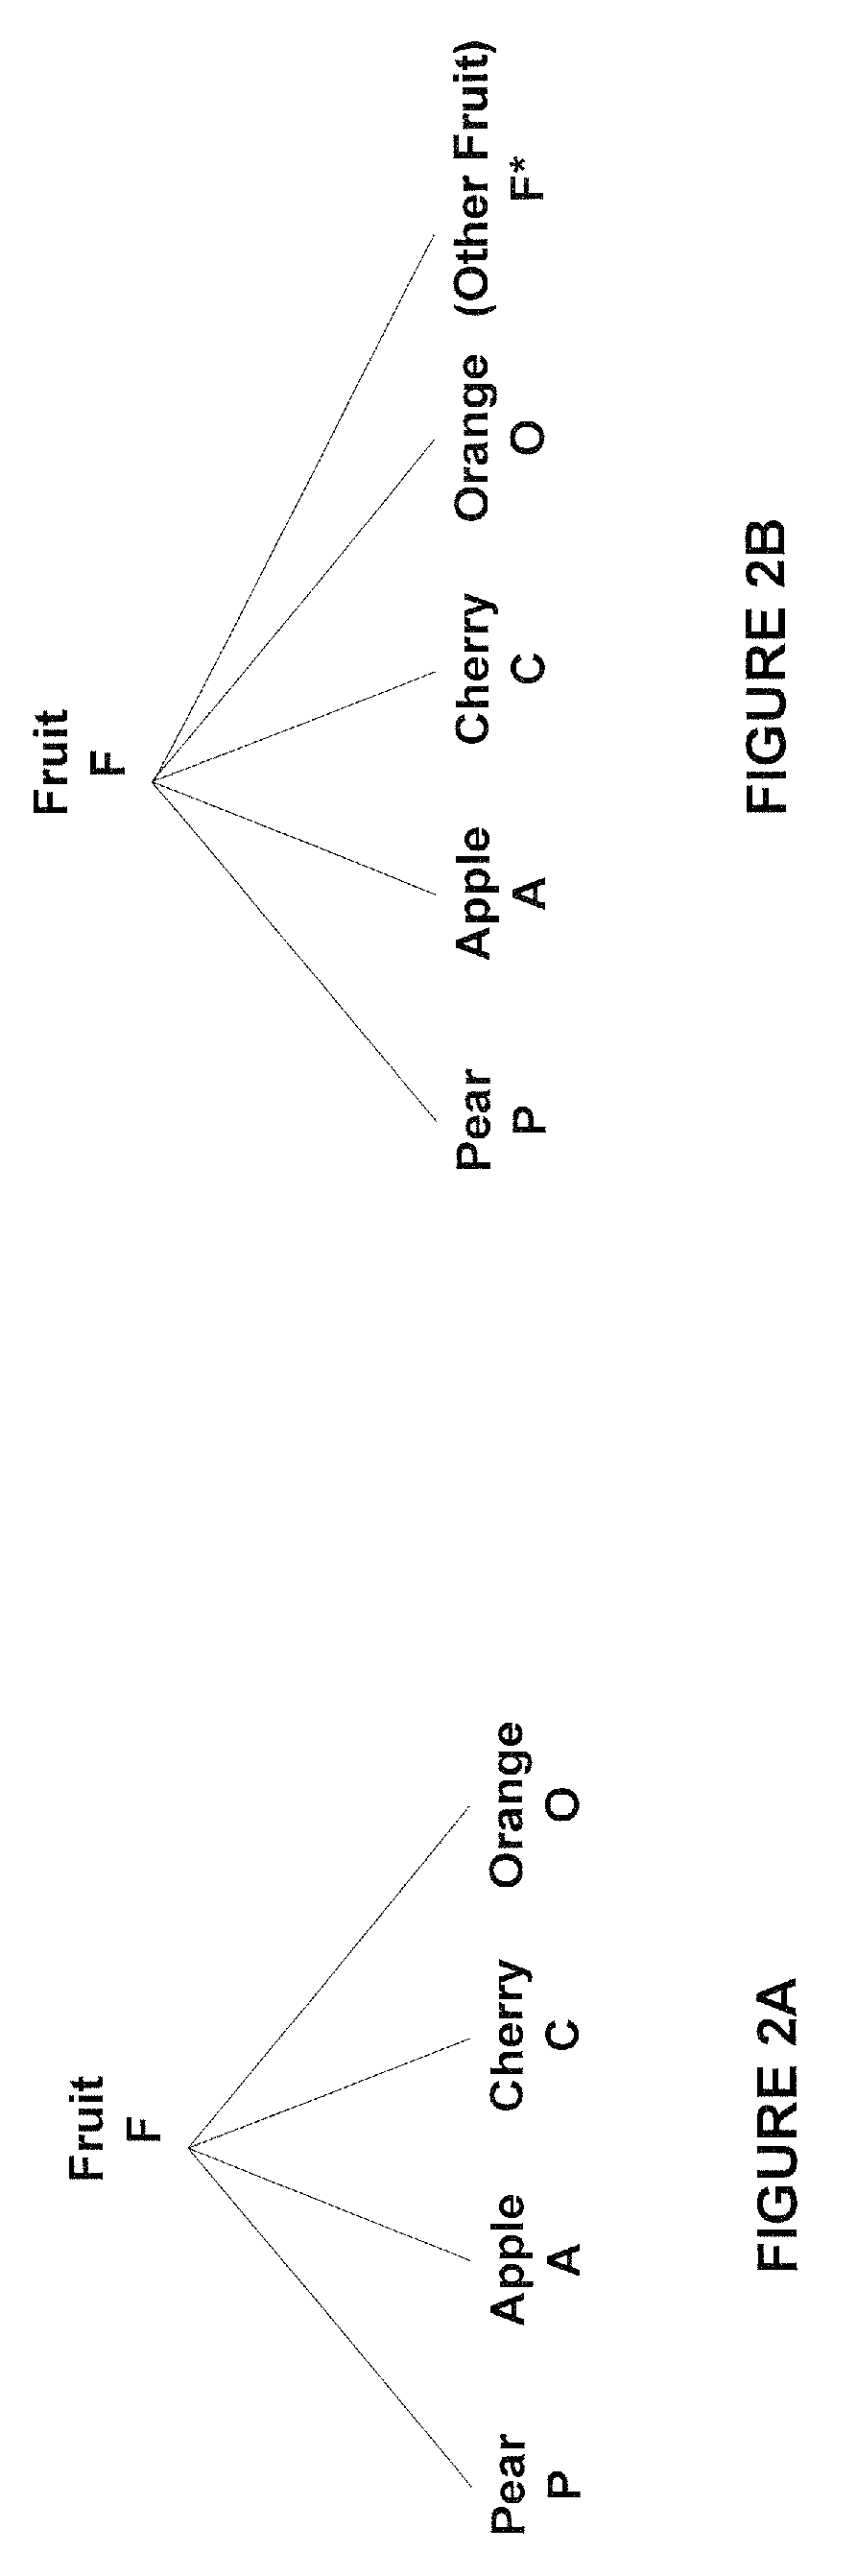 Computer-based method for finding similar objects using a taxonomy